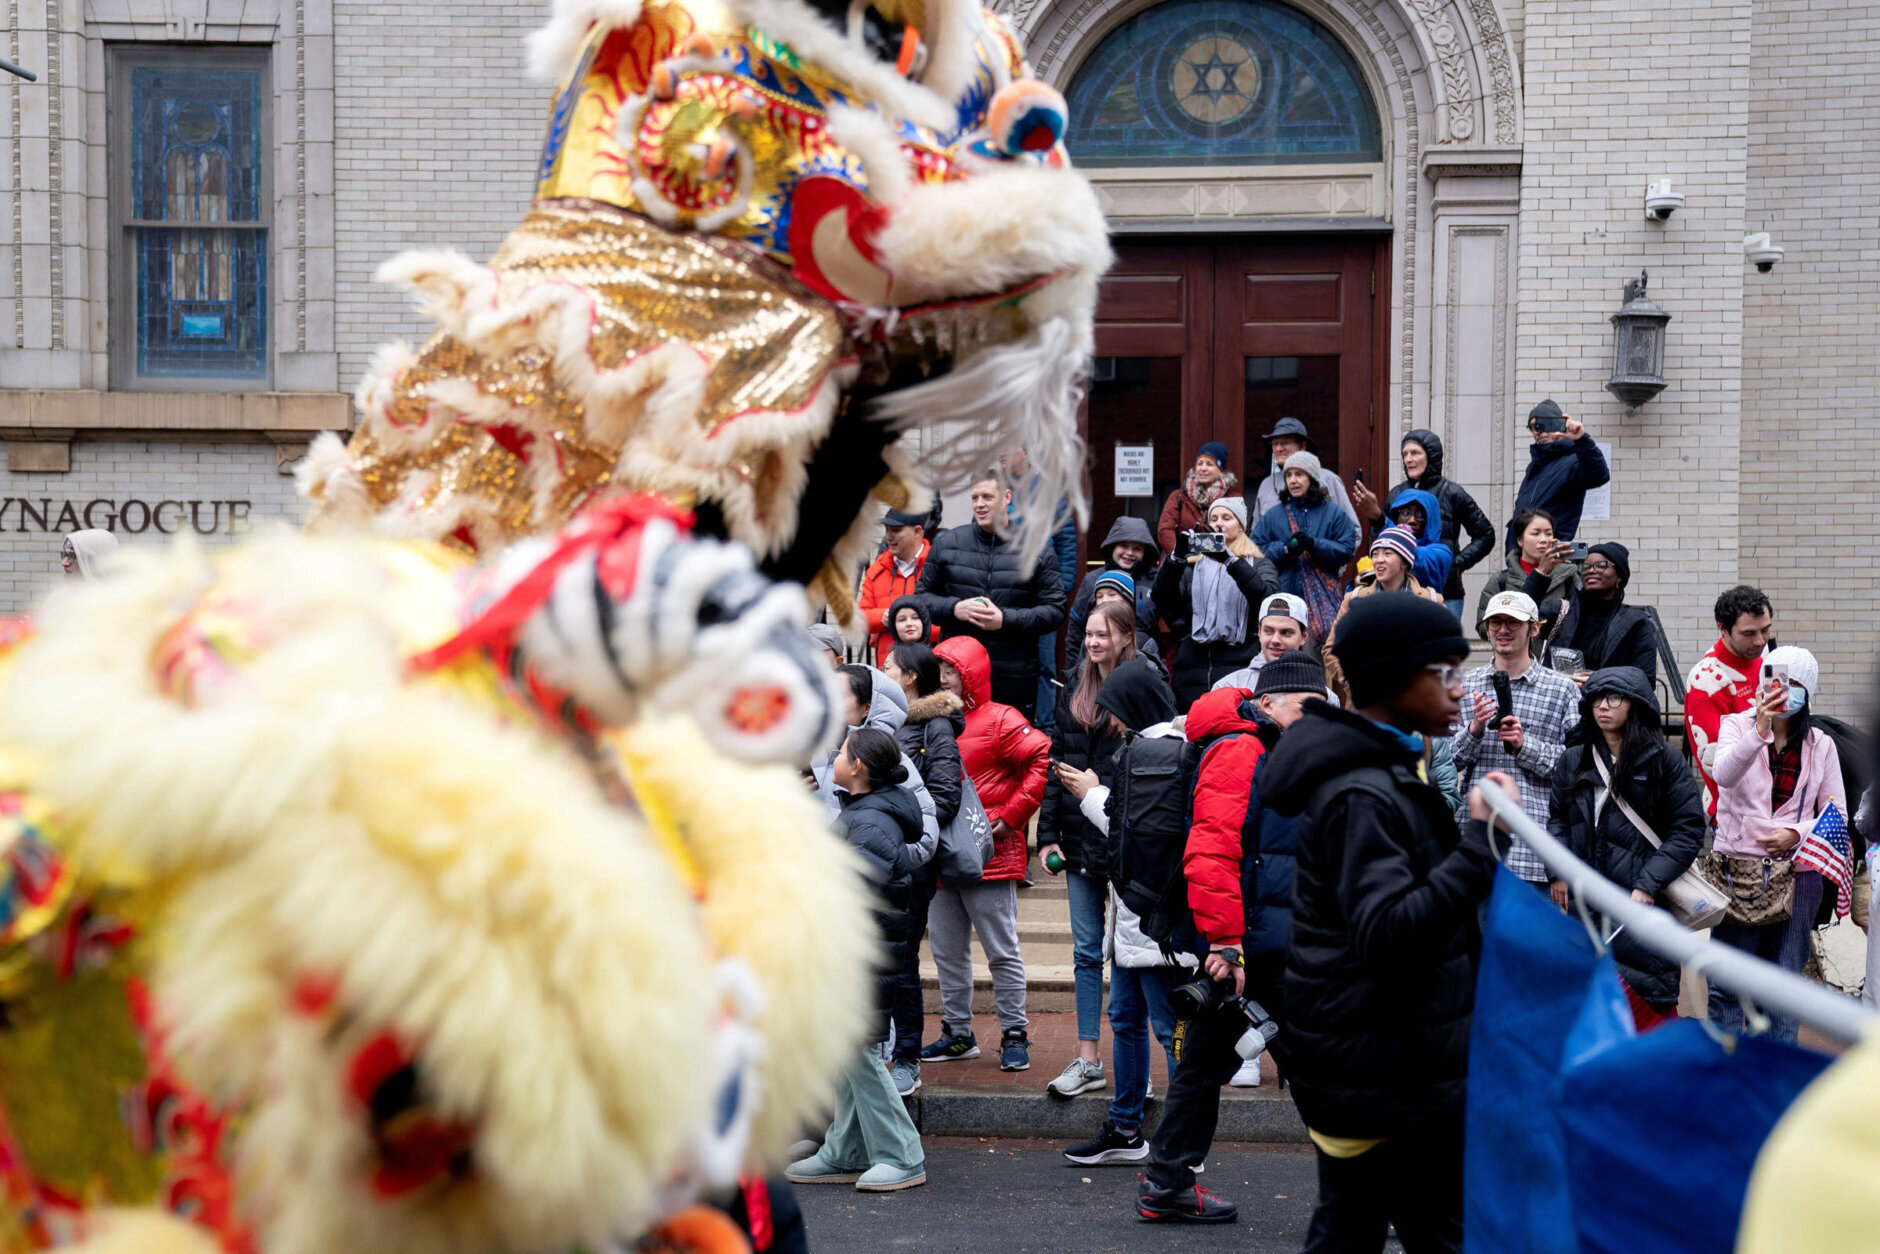 Onlookers watch the Lunar New Year Parade in the Chinatown neighborhood of Washington, DC, on January 22, 2023. - 2023 is the year of the rabbit in the Chinese horoscope. (Photo by Stefani Reynolds / AFP) (Photo by STEFANI REYNOLDS/AFP via Getty Images)